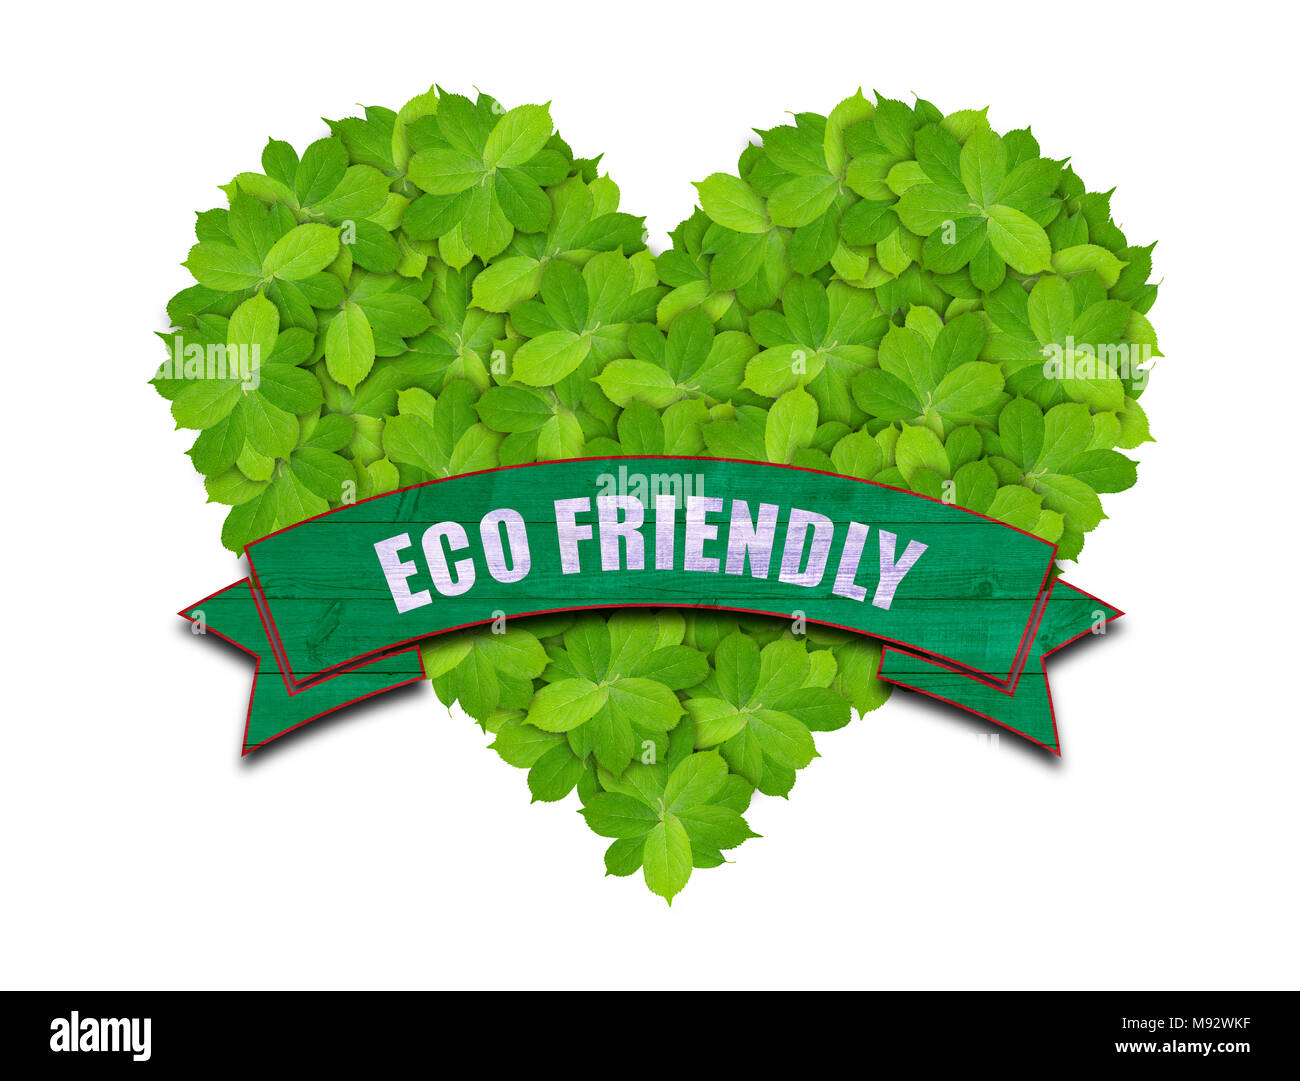 Green heart made of green leaves with green eco friendly banner Stock Photo